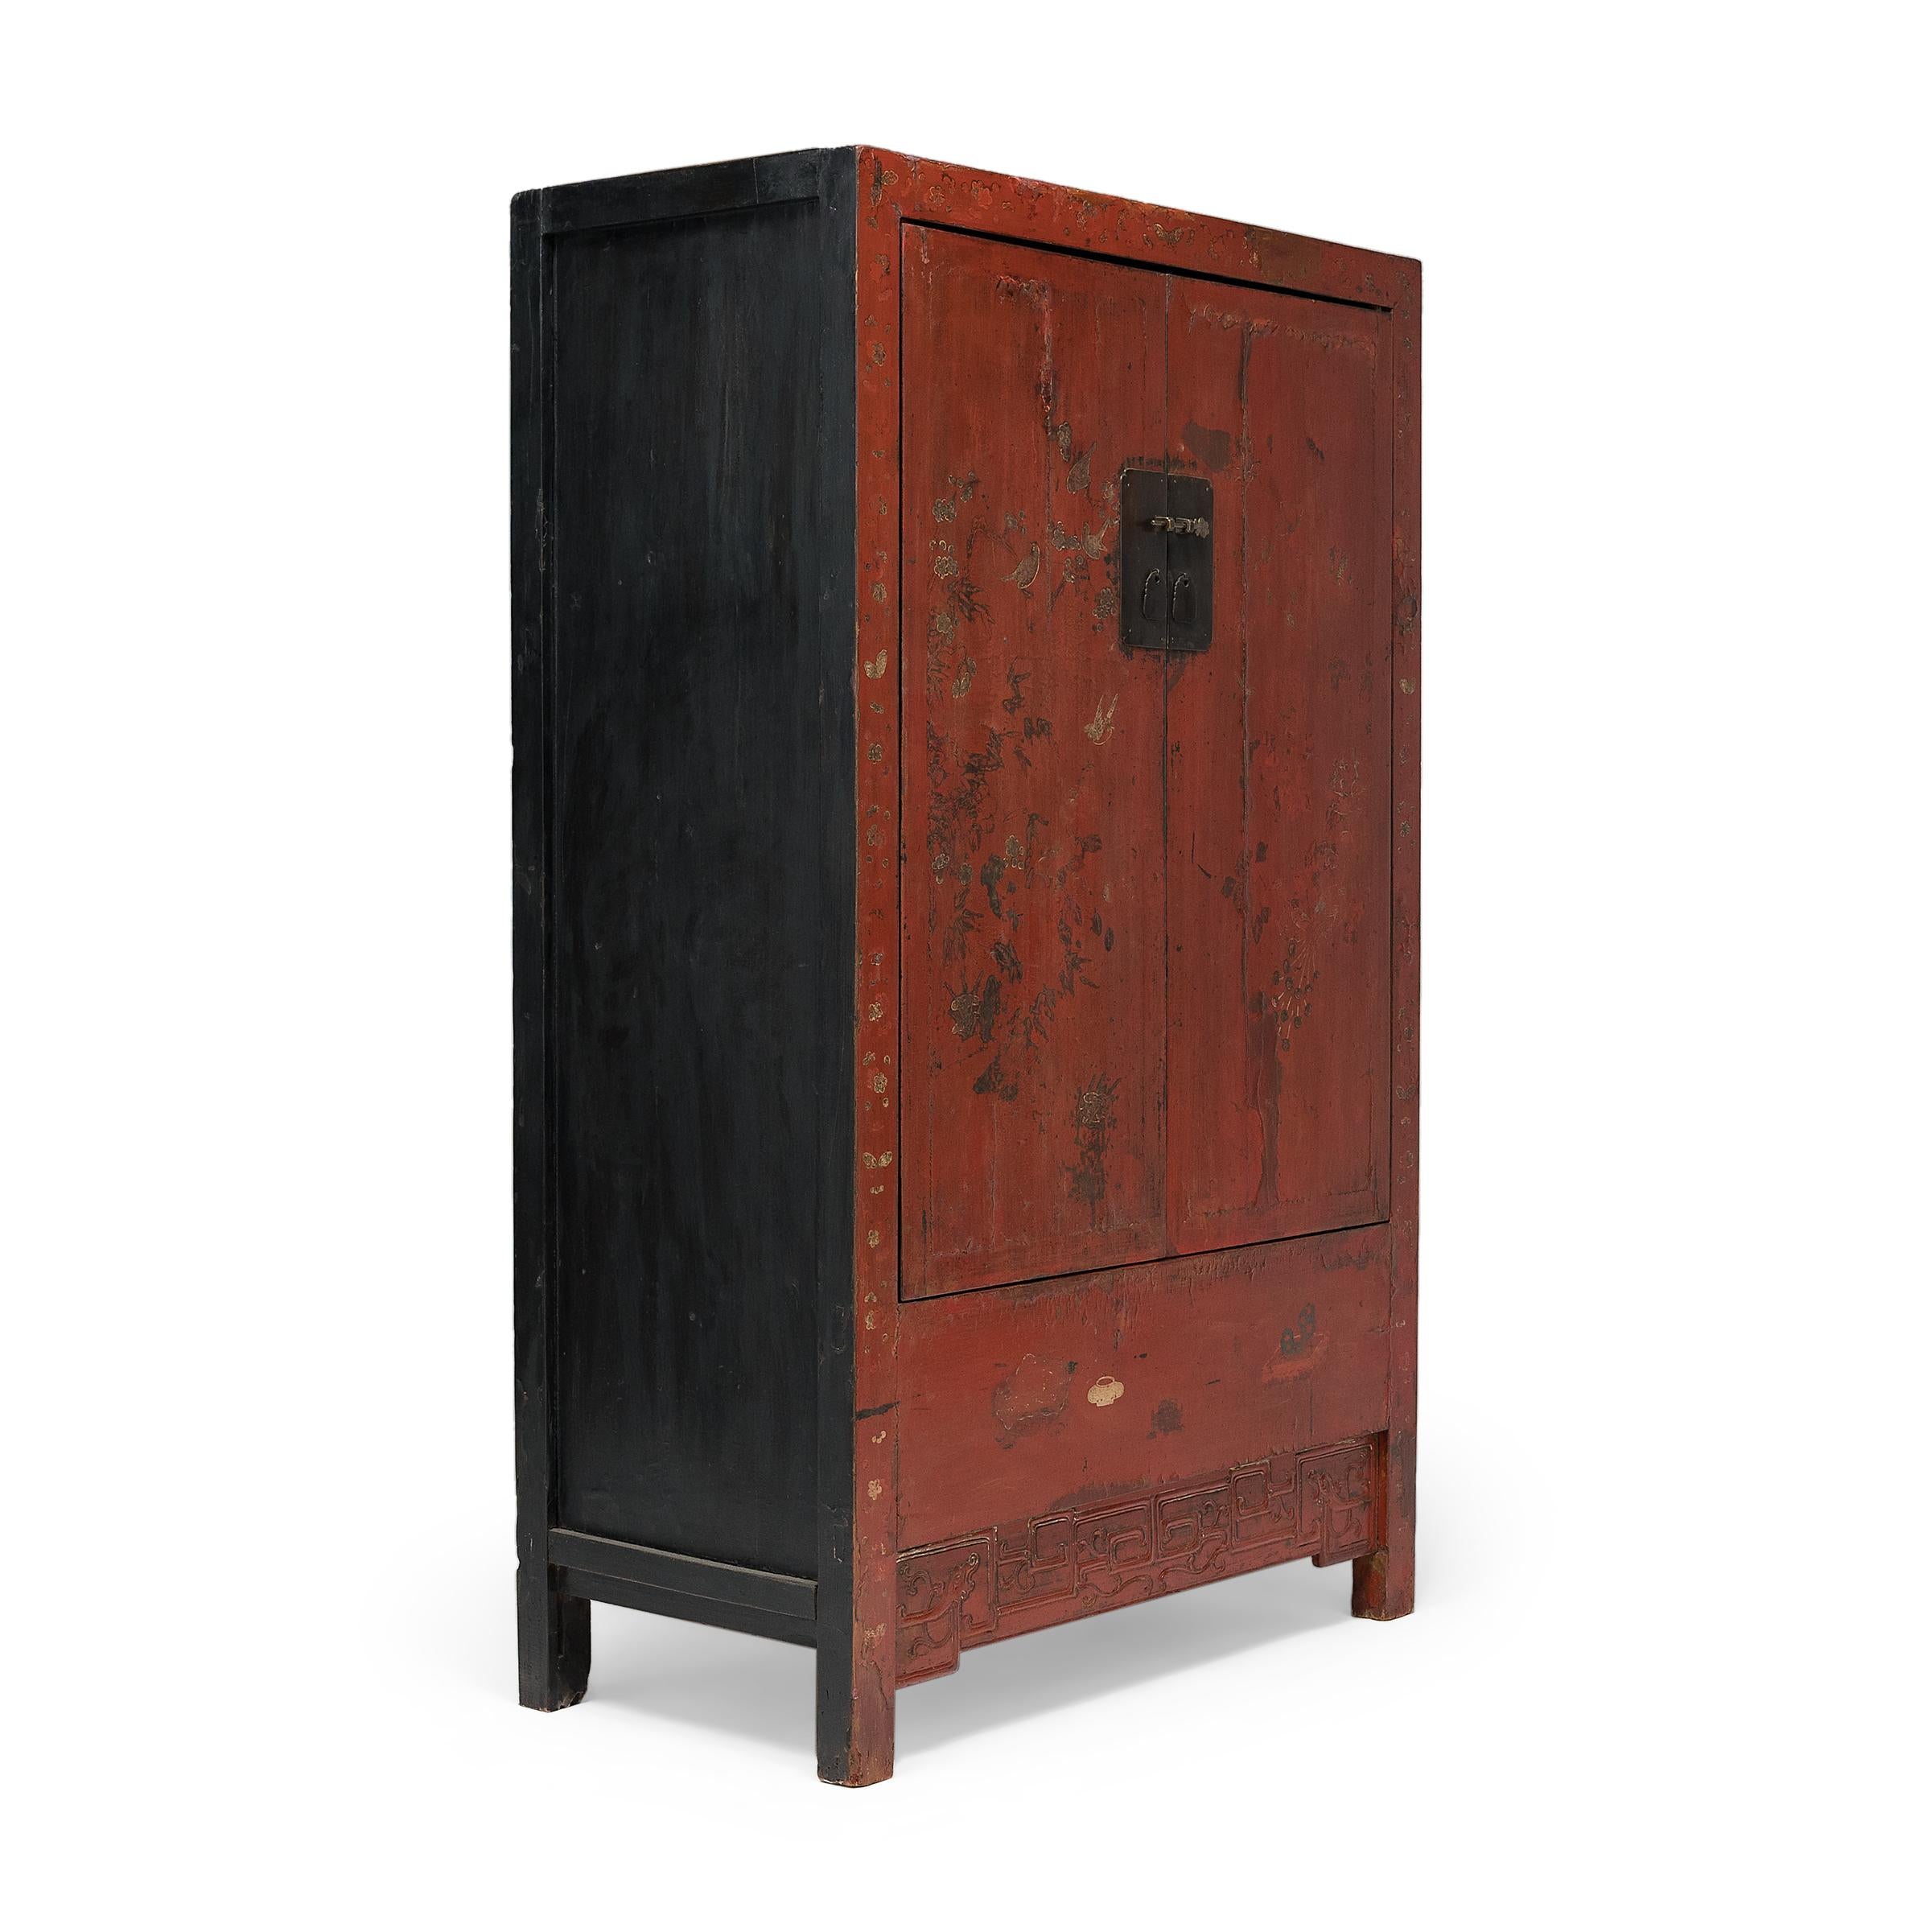 Crafted in the mid-19th century, this tall cabinet has a clean-lined form, designed with straight sides, square corners and minimal carvings. The cabinet front is cloaked in a bright, cinnabar-red lacquer finish, contrasted by black lacquer sides